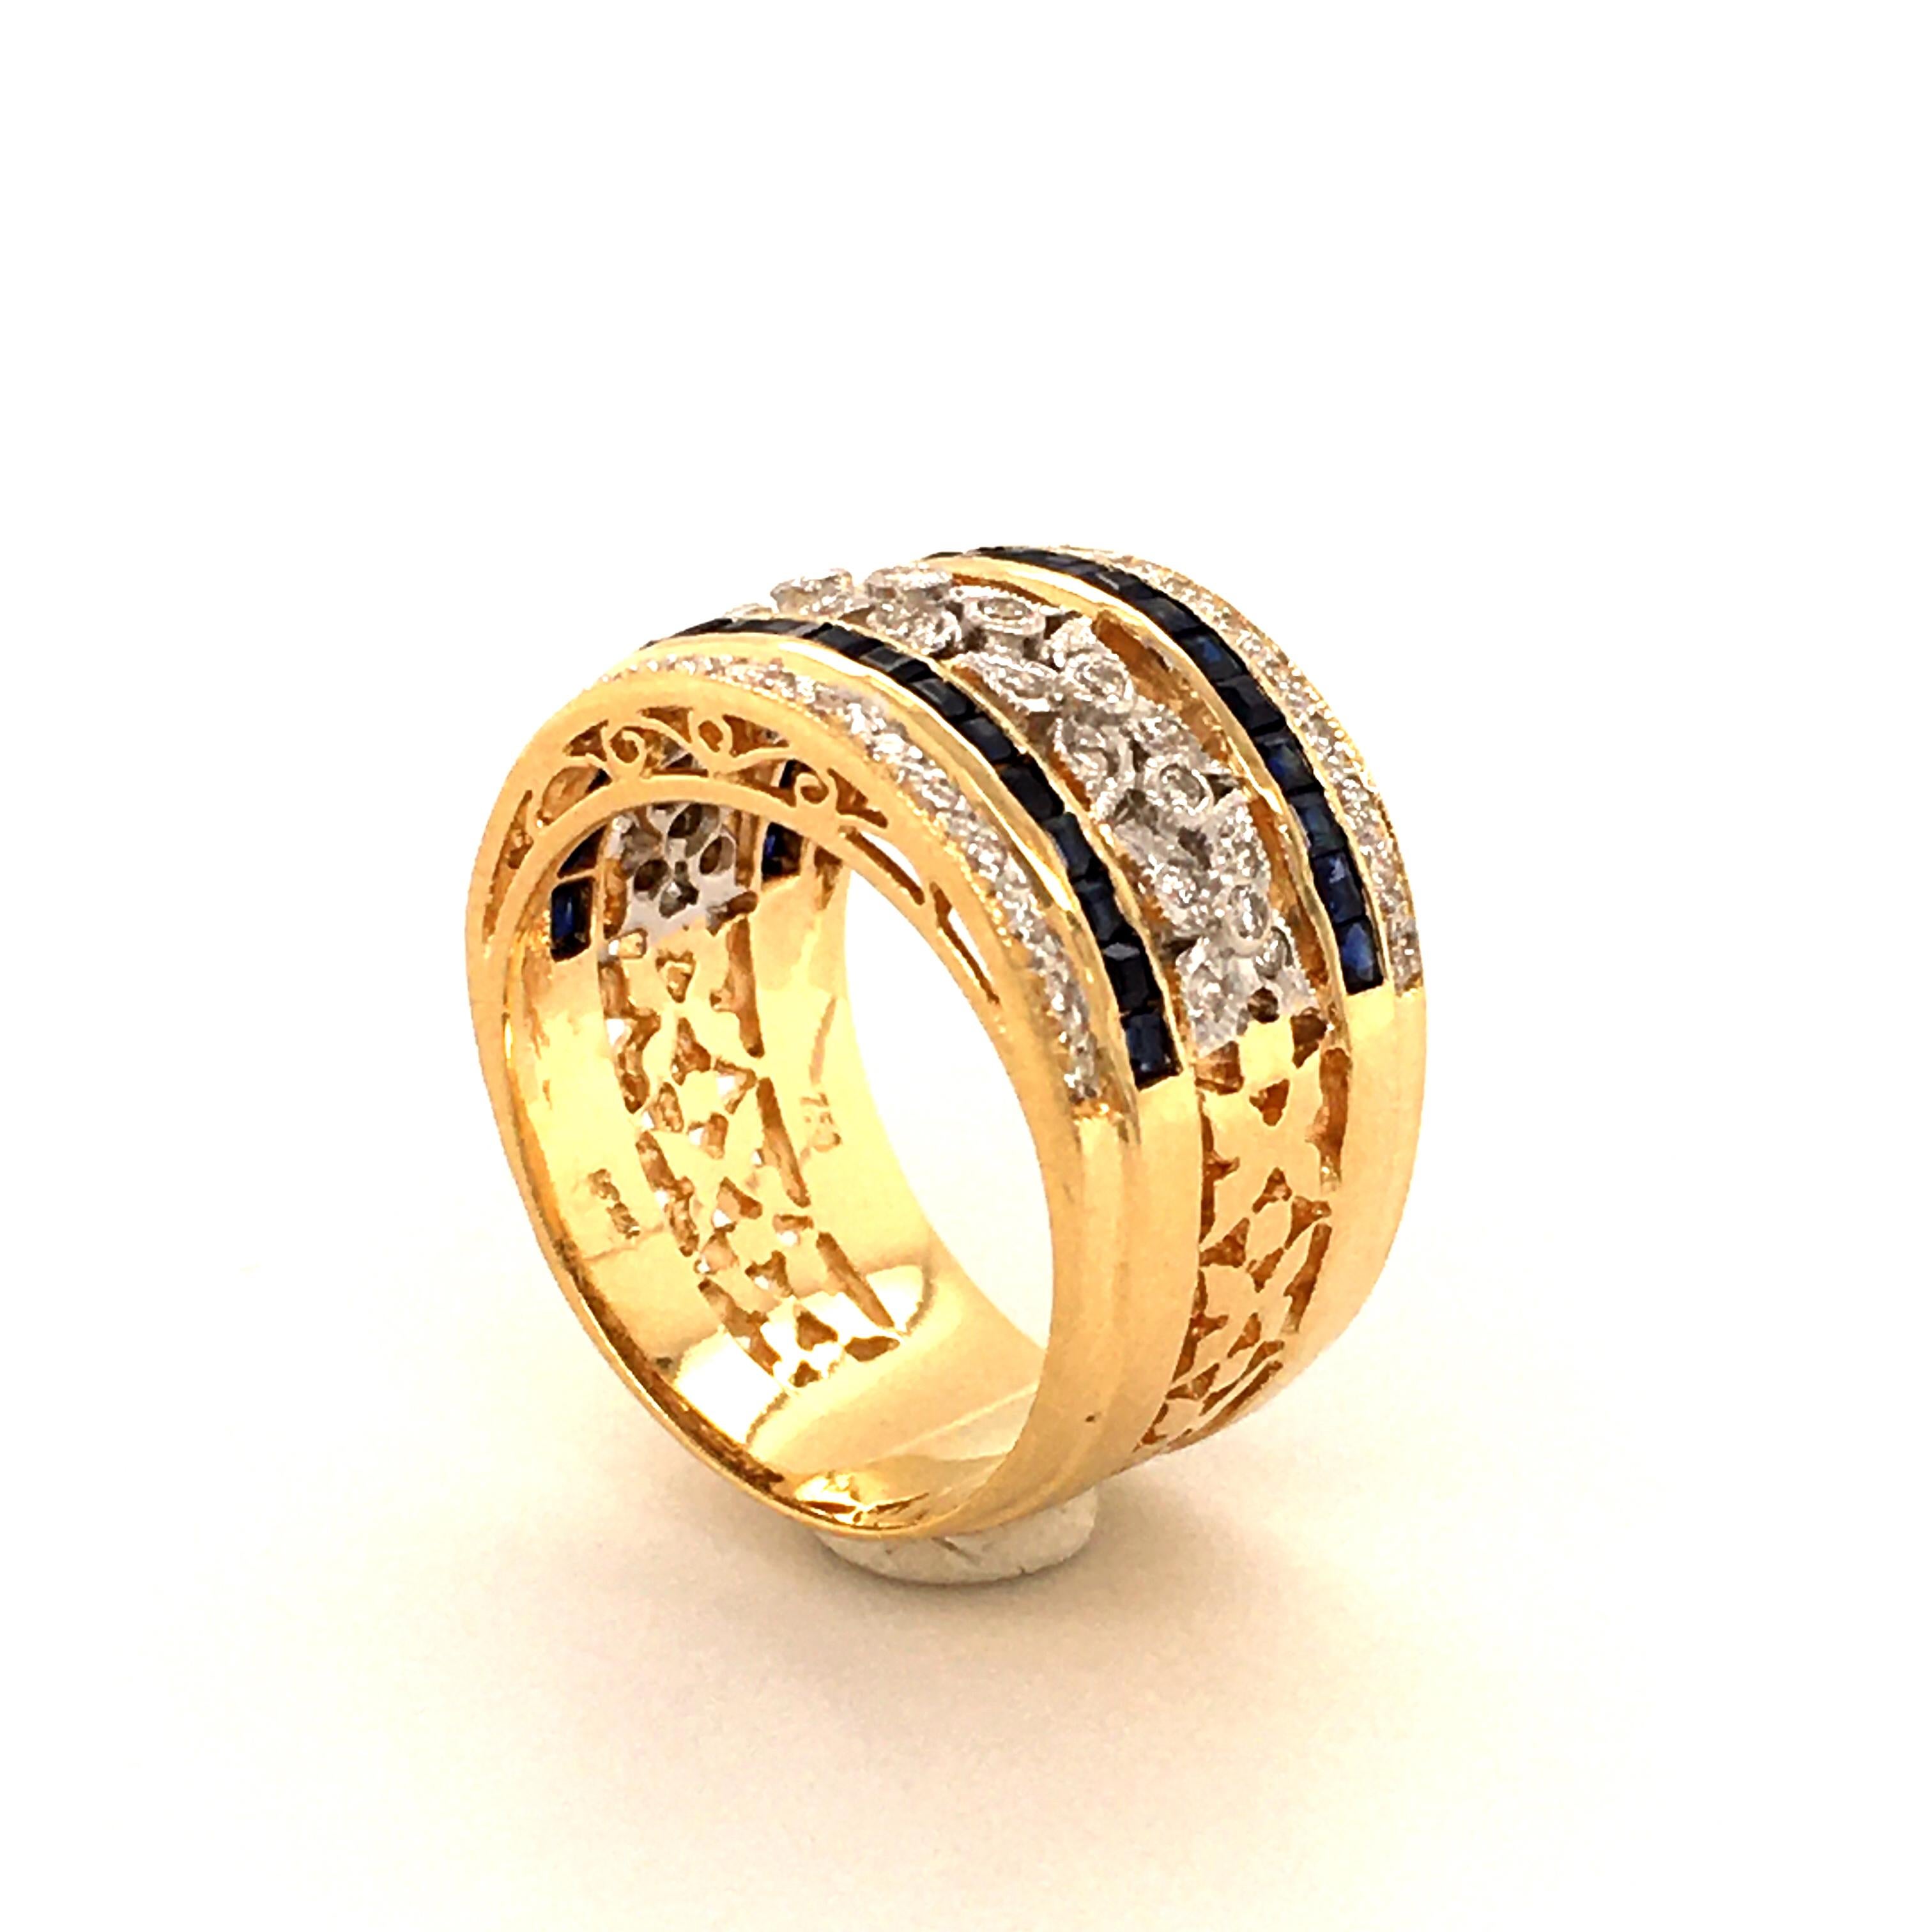 Contemporary Sapphire and Diamond Ring in 18 Karat Yellow and White Gold